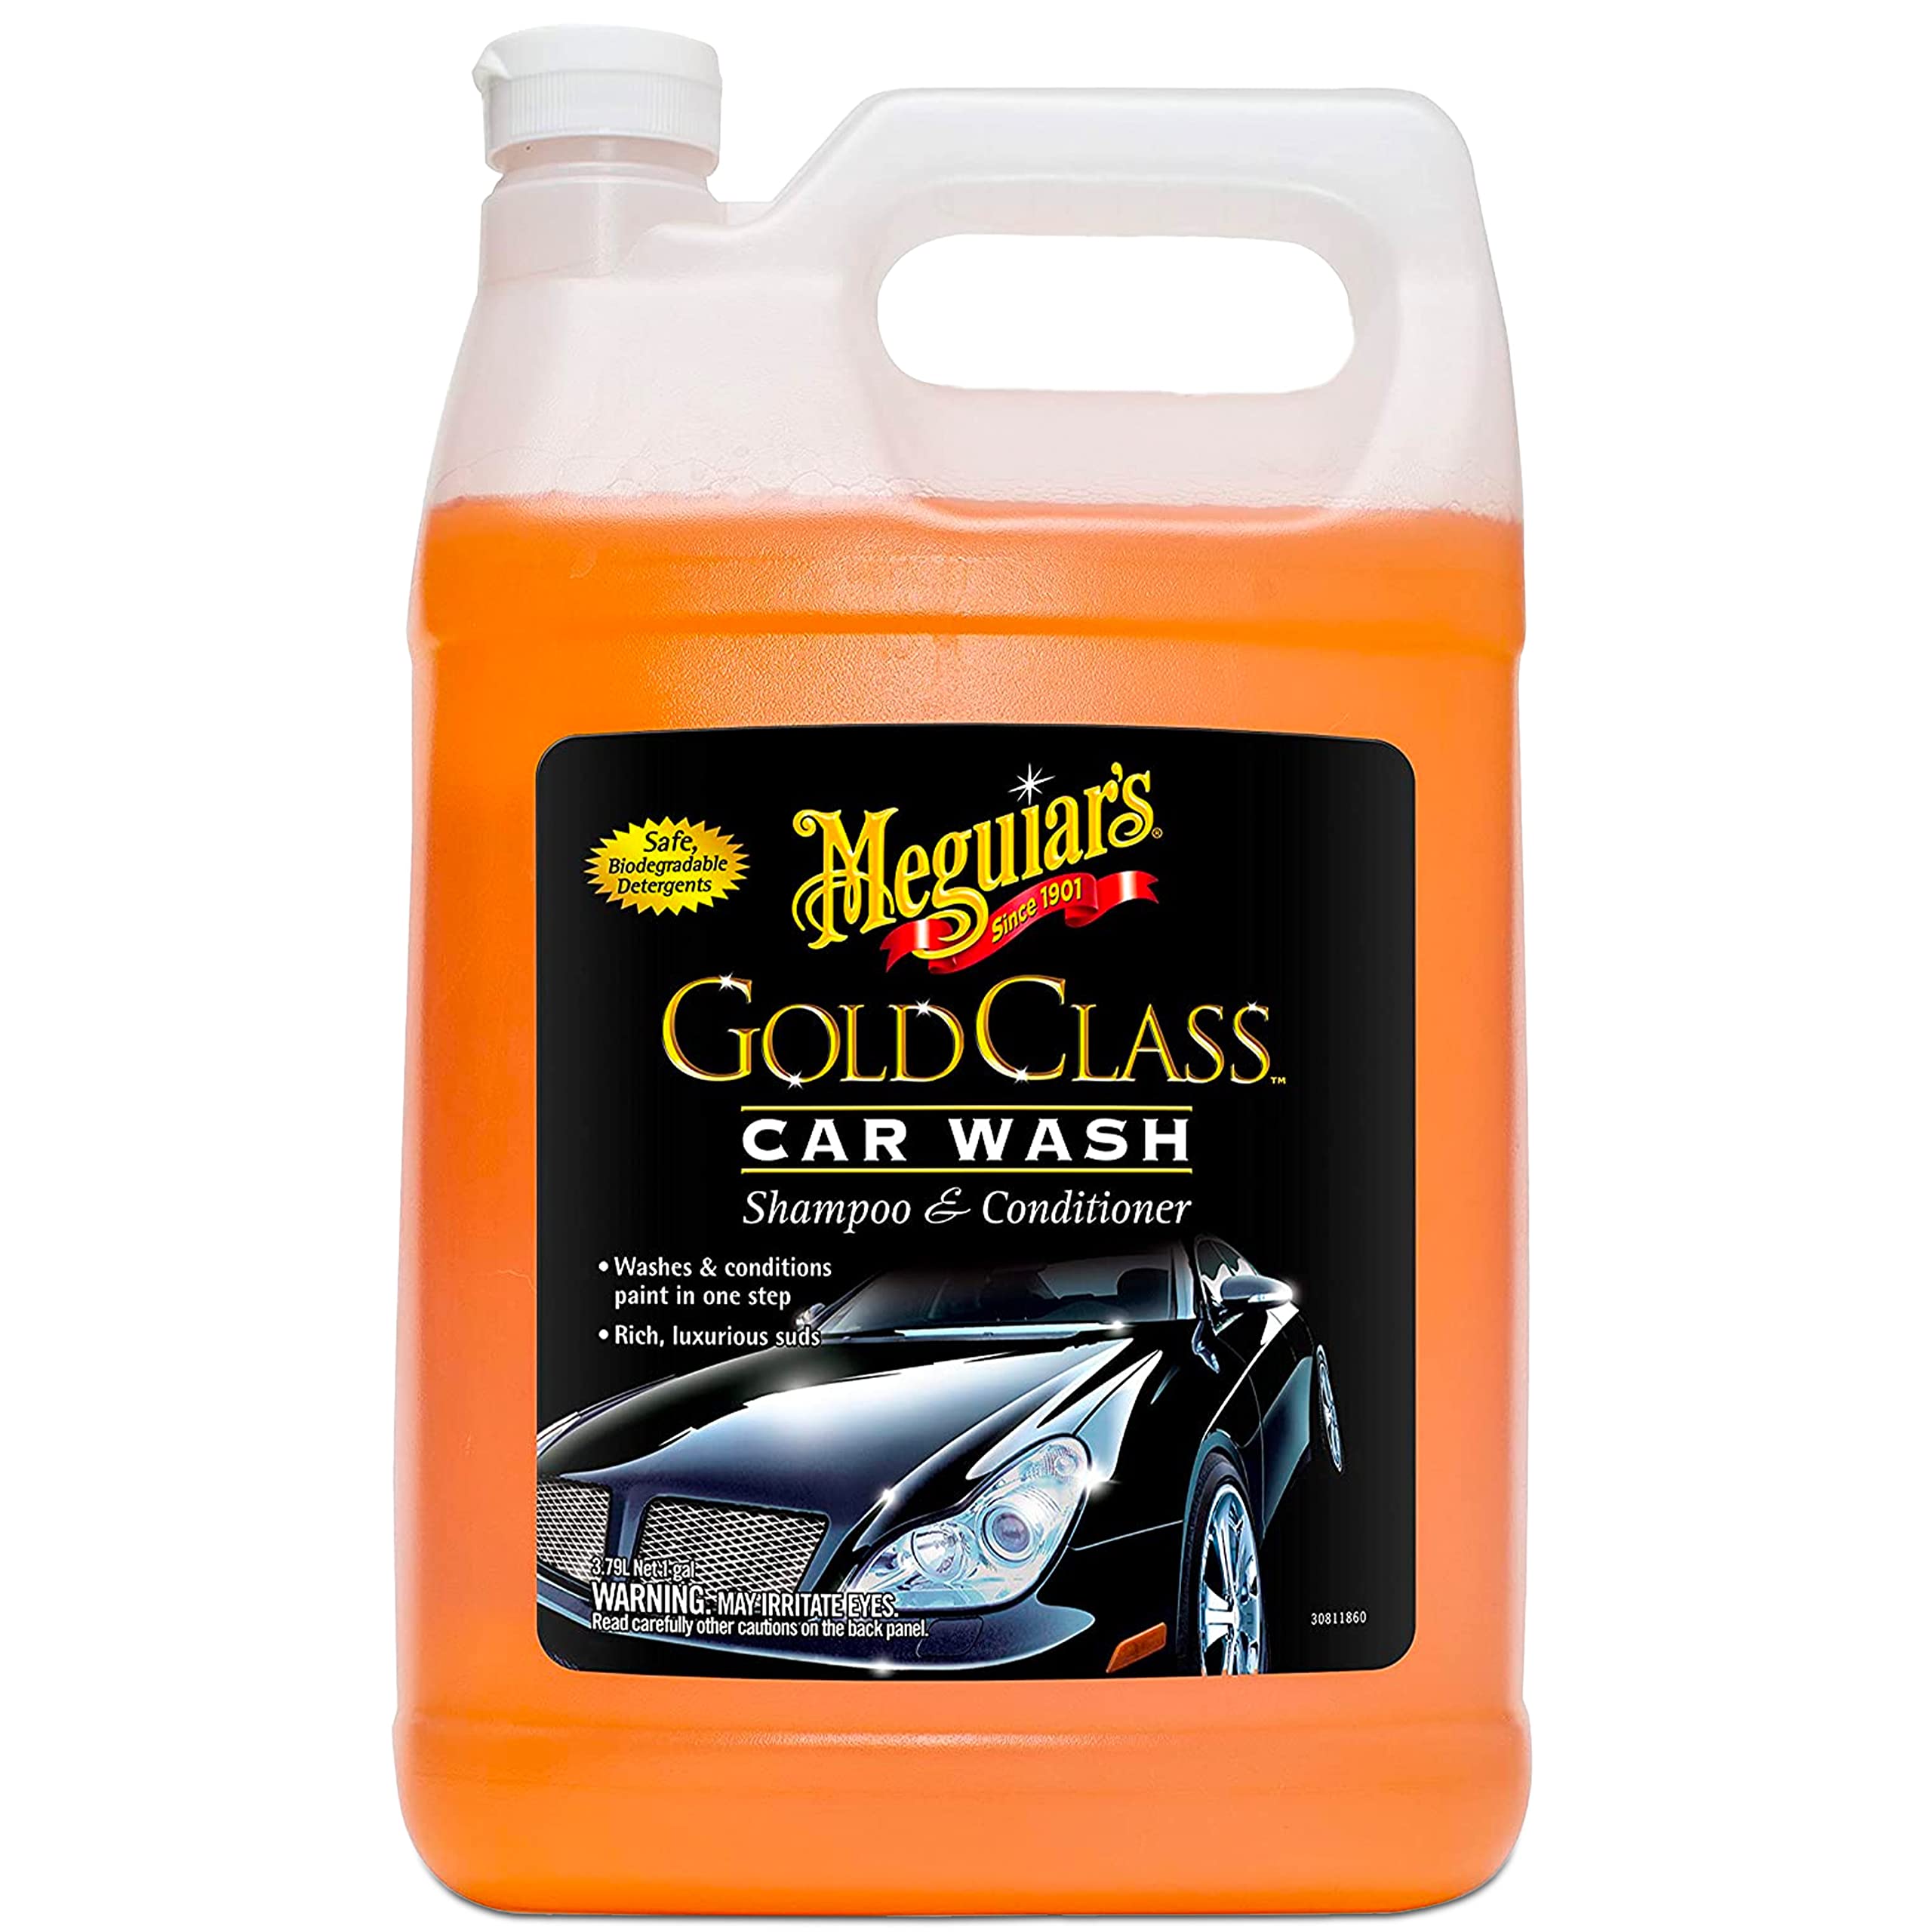 Meguiars Meguiar's Gold Class Car Wash, Ultra-Rich Car Wash Foam Soap and Conditioner for Car Cleaning, Car Paint Cleaner to Wash and Con